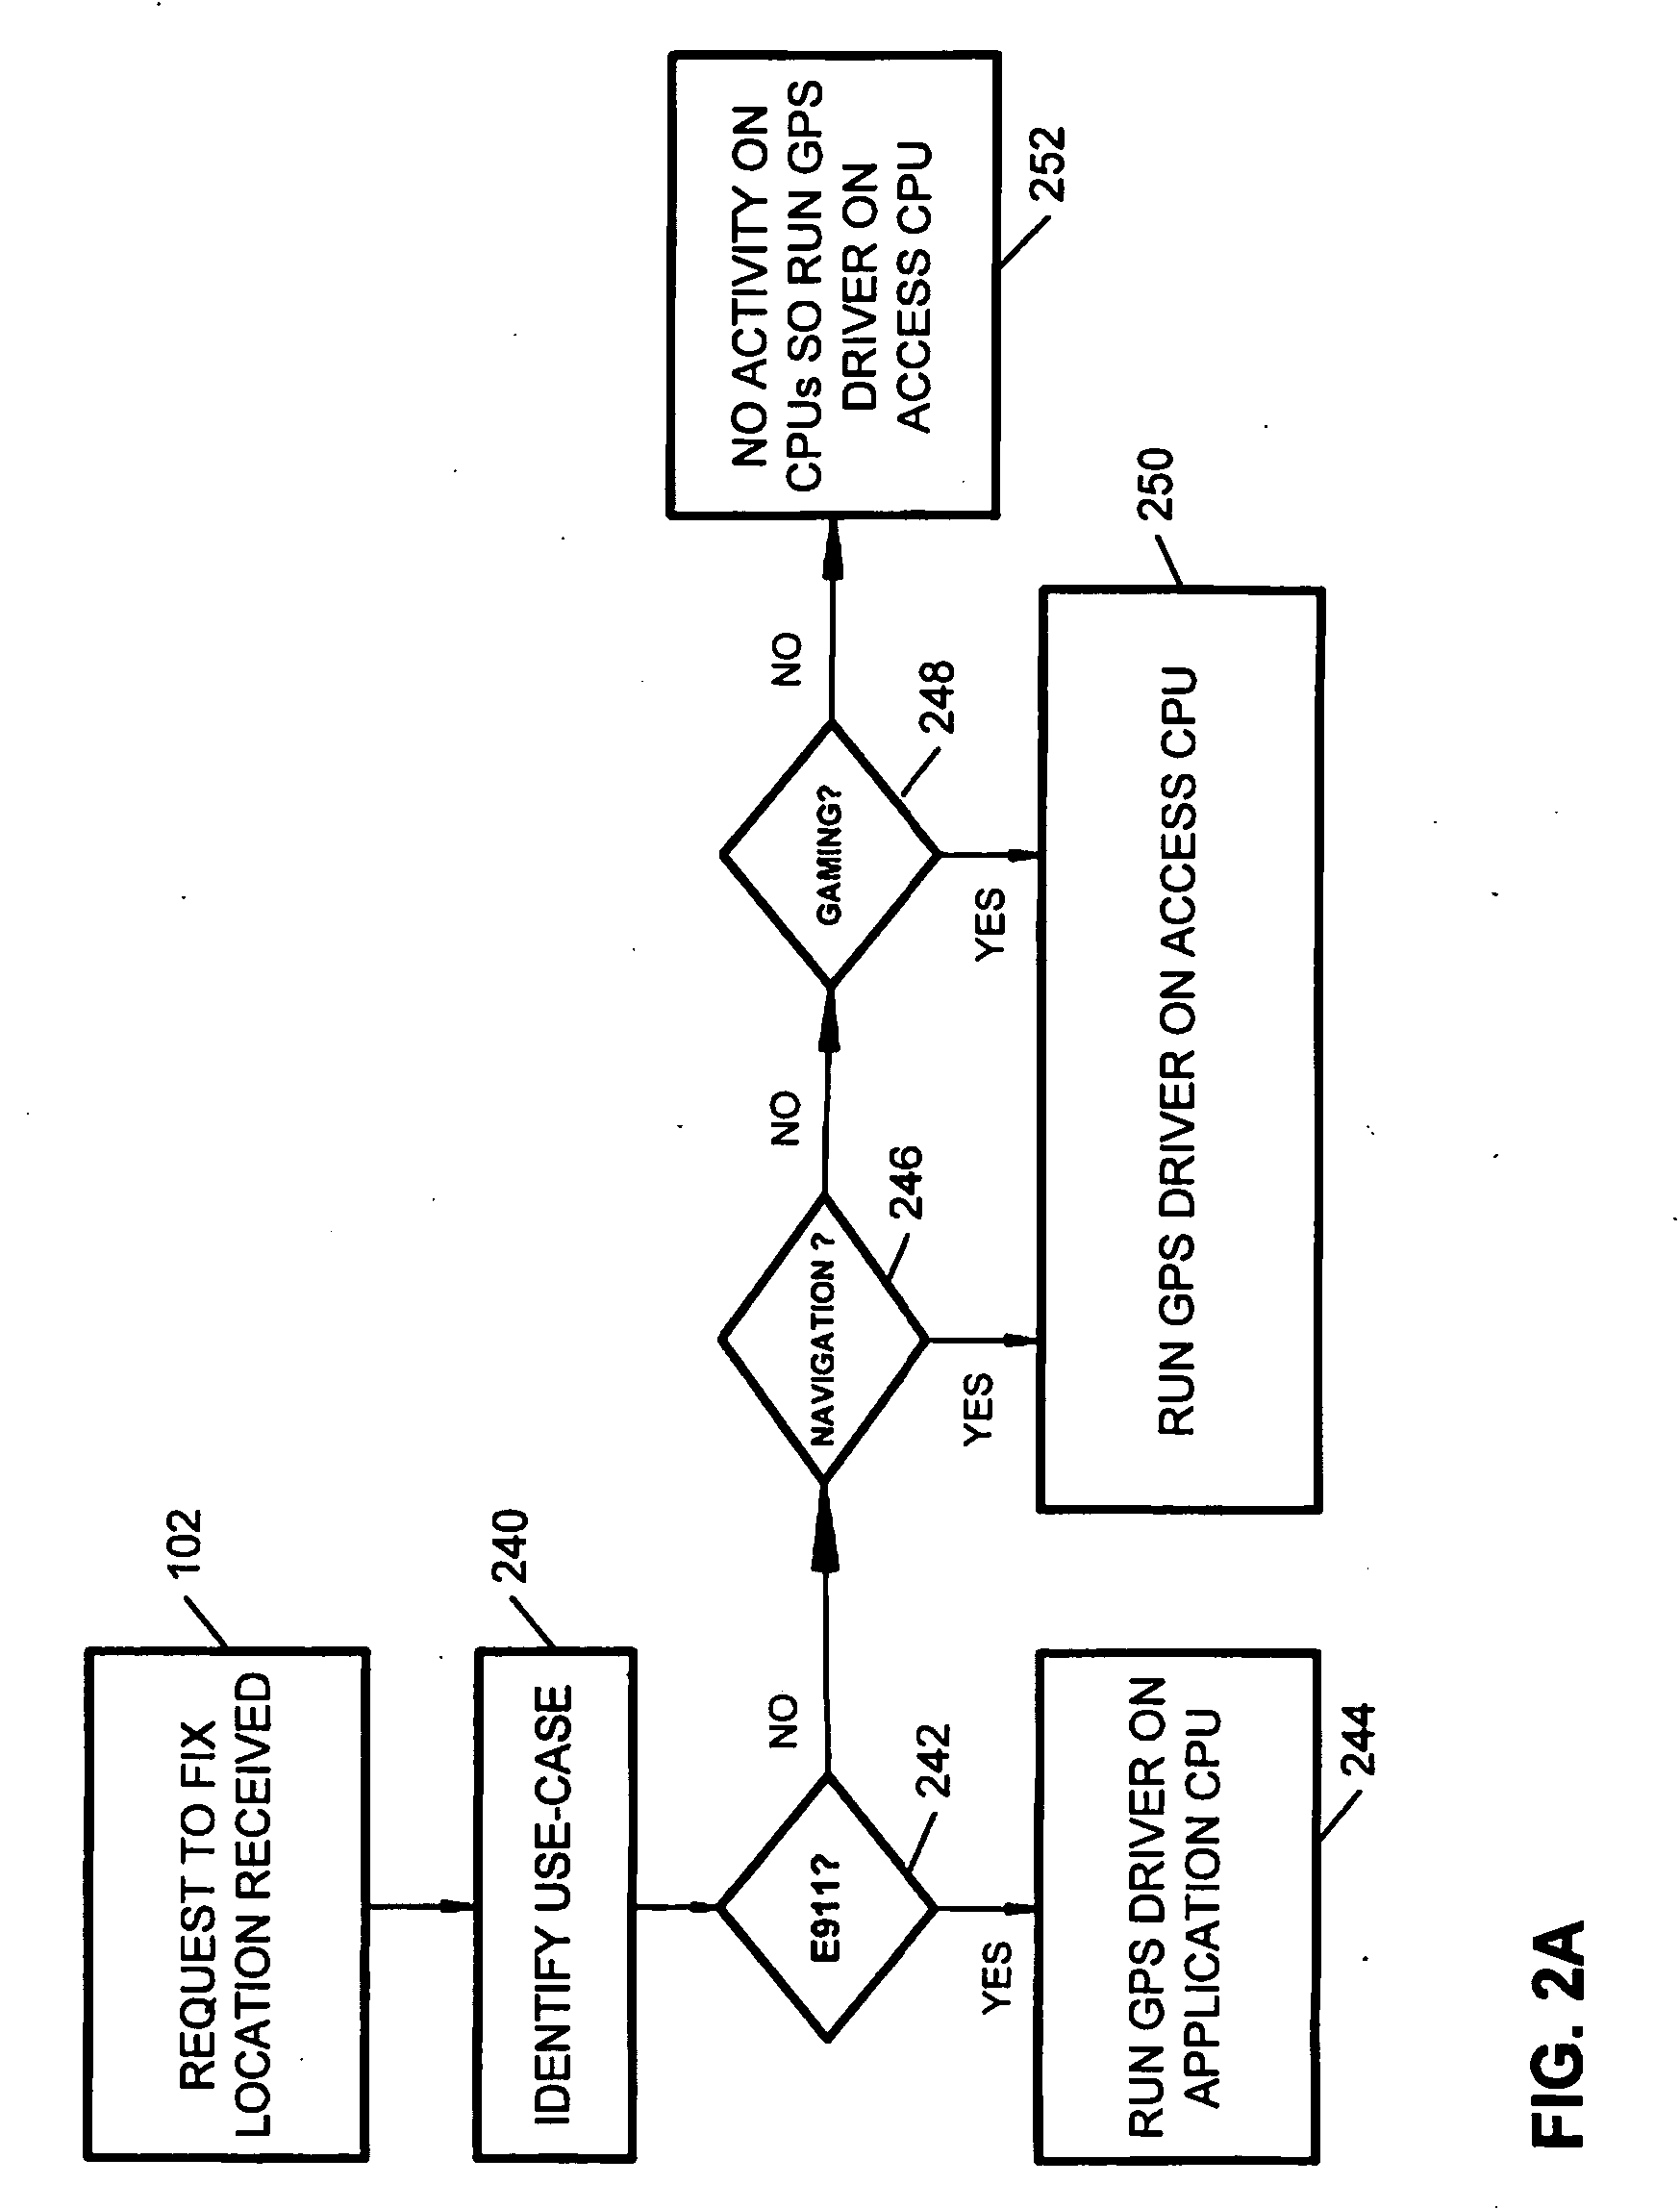 Method and device for providing location services